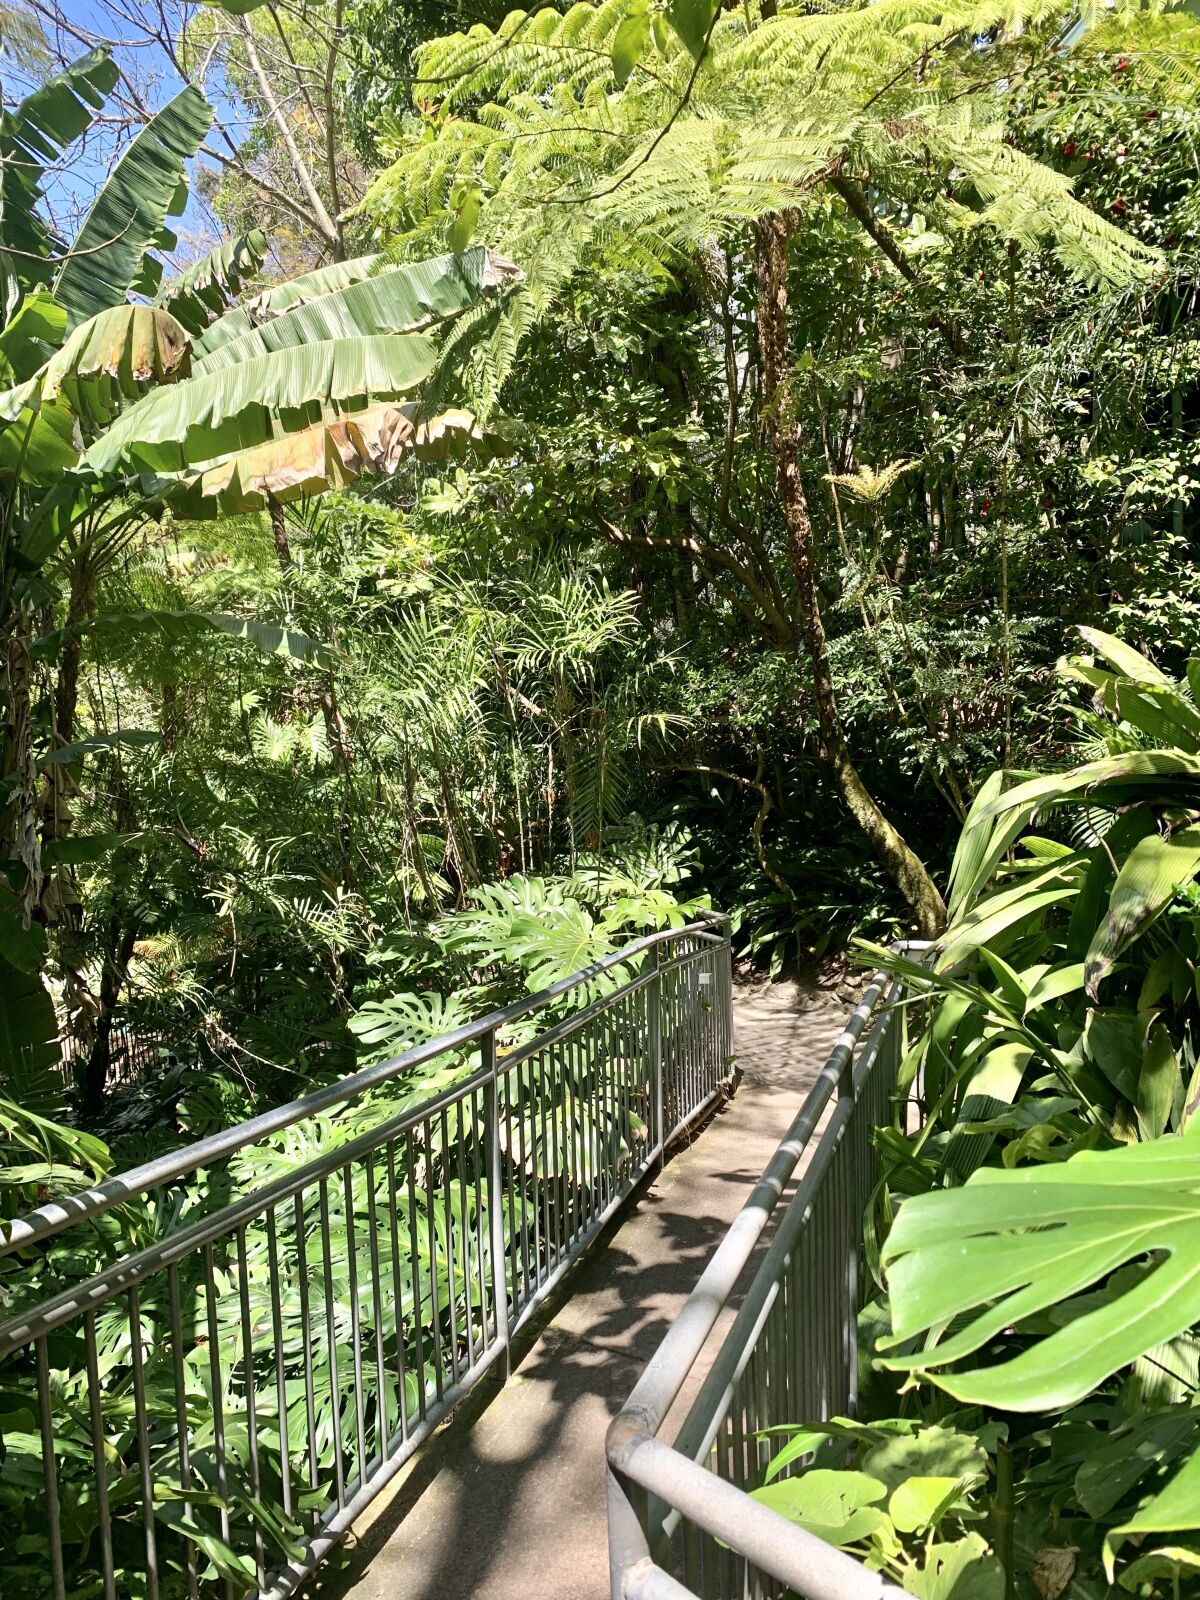 A pathway winds through diverse plantings in shady Fern Canyon at the San Diego Zoo.